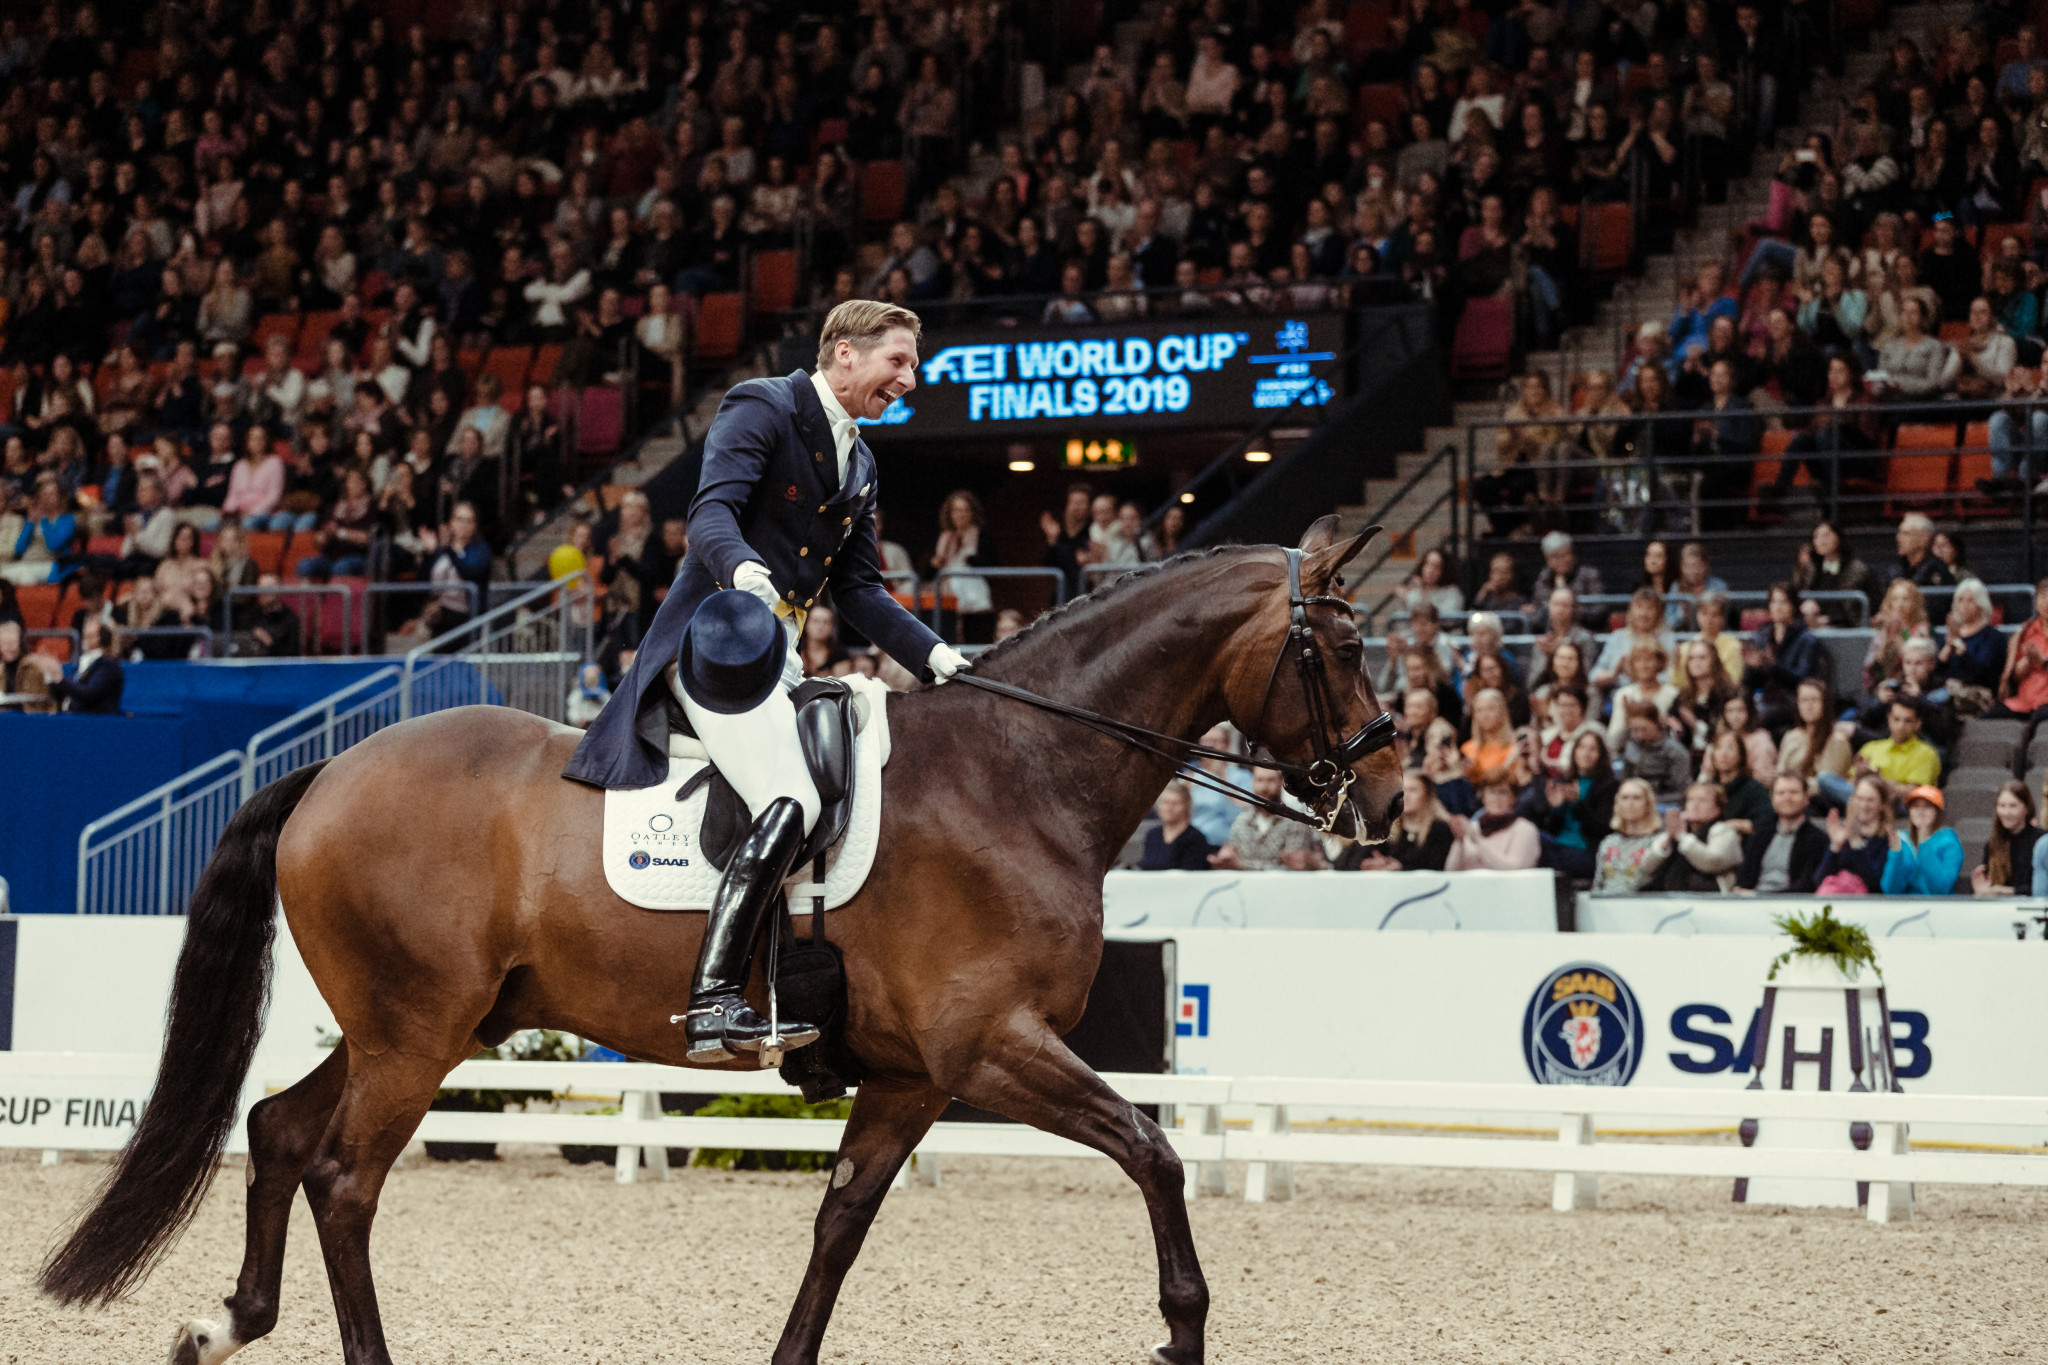 FEI Dressage Calendar Task Force agrees proposals in virtual meeting